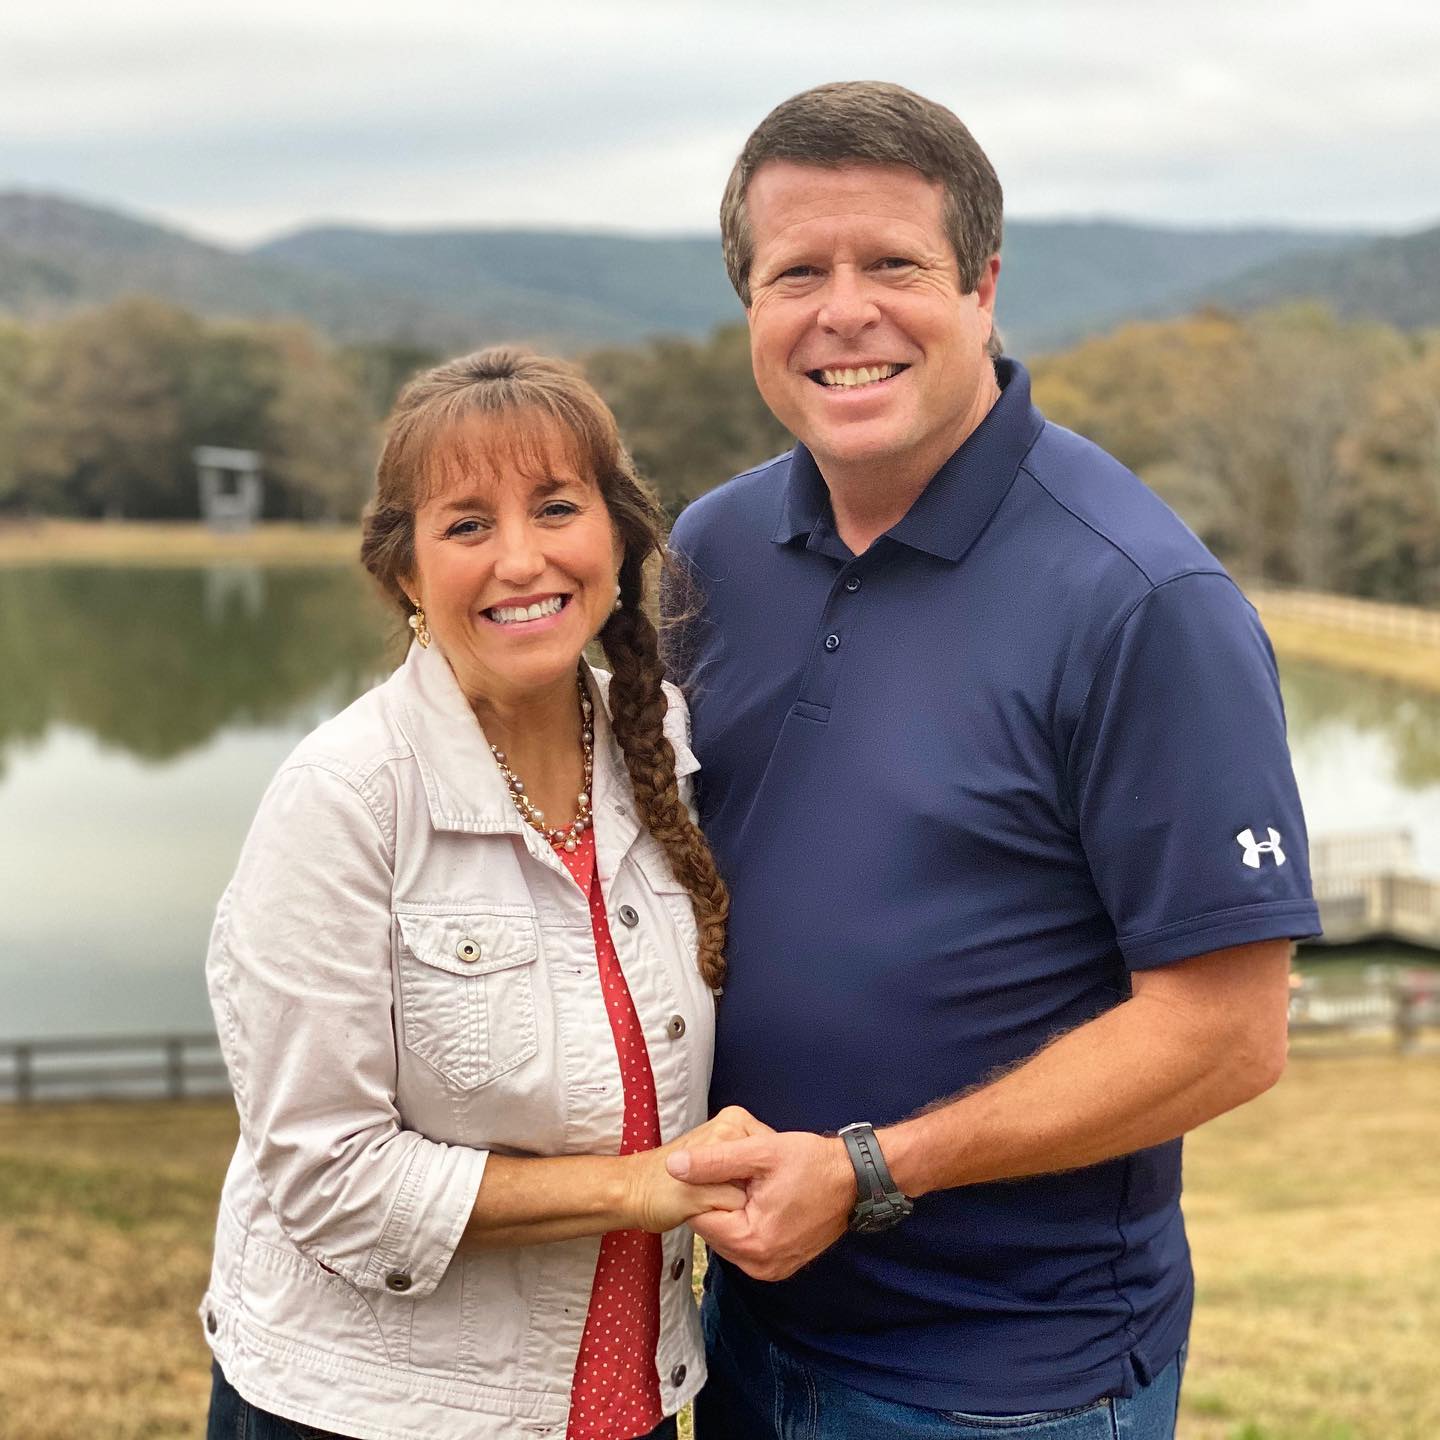 Jim Bob and Michelle Duggar raised their kids with strict rules